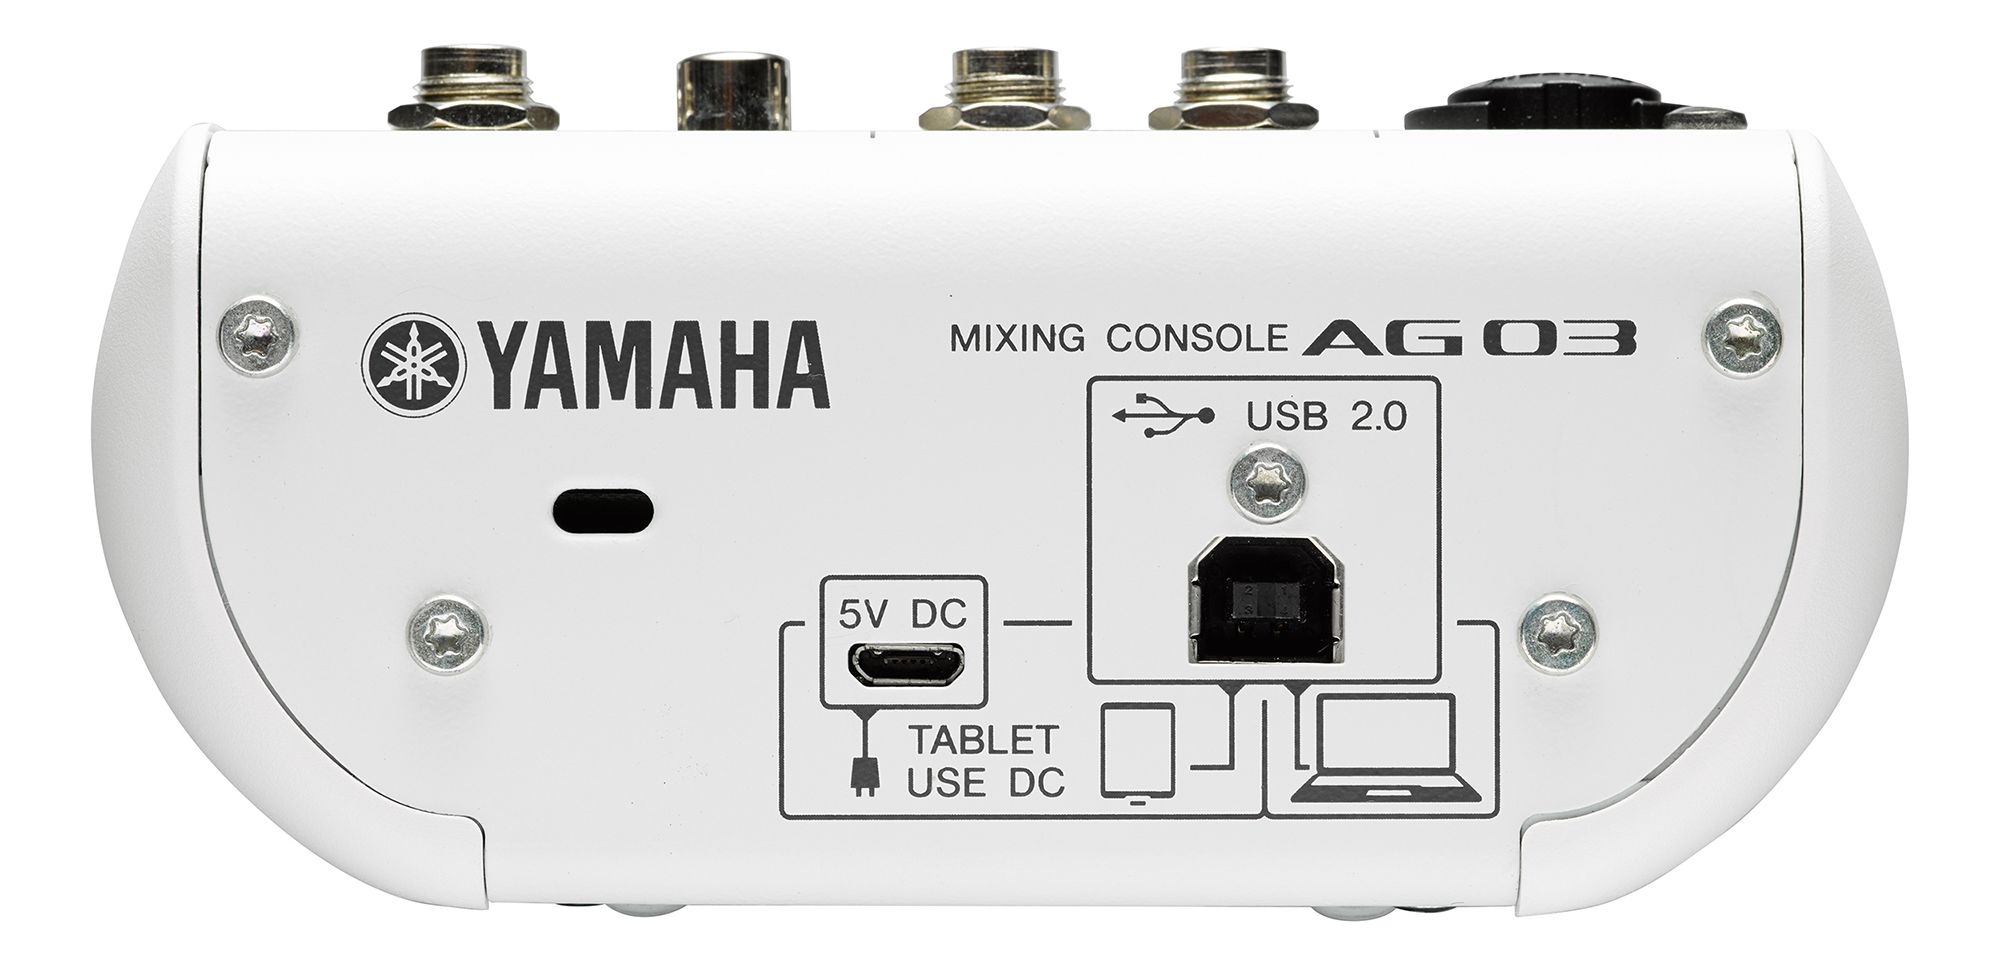 AG06 / AG03 - Overview - Interfaces (FireWire/USB) - Synthesizers  Music  Production Tools - Products - Yamaha USA